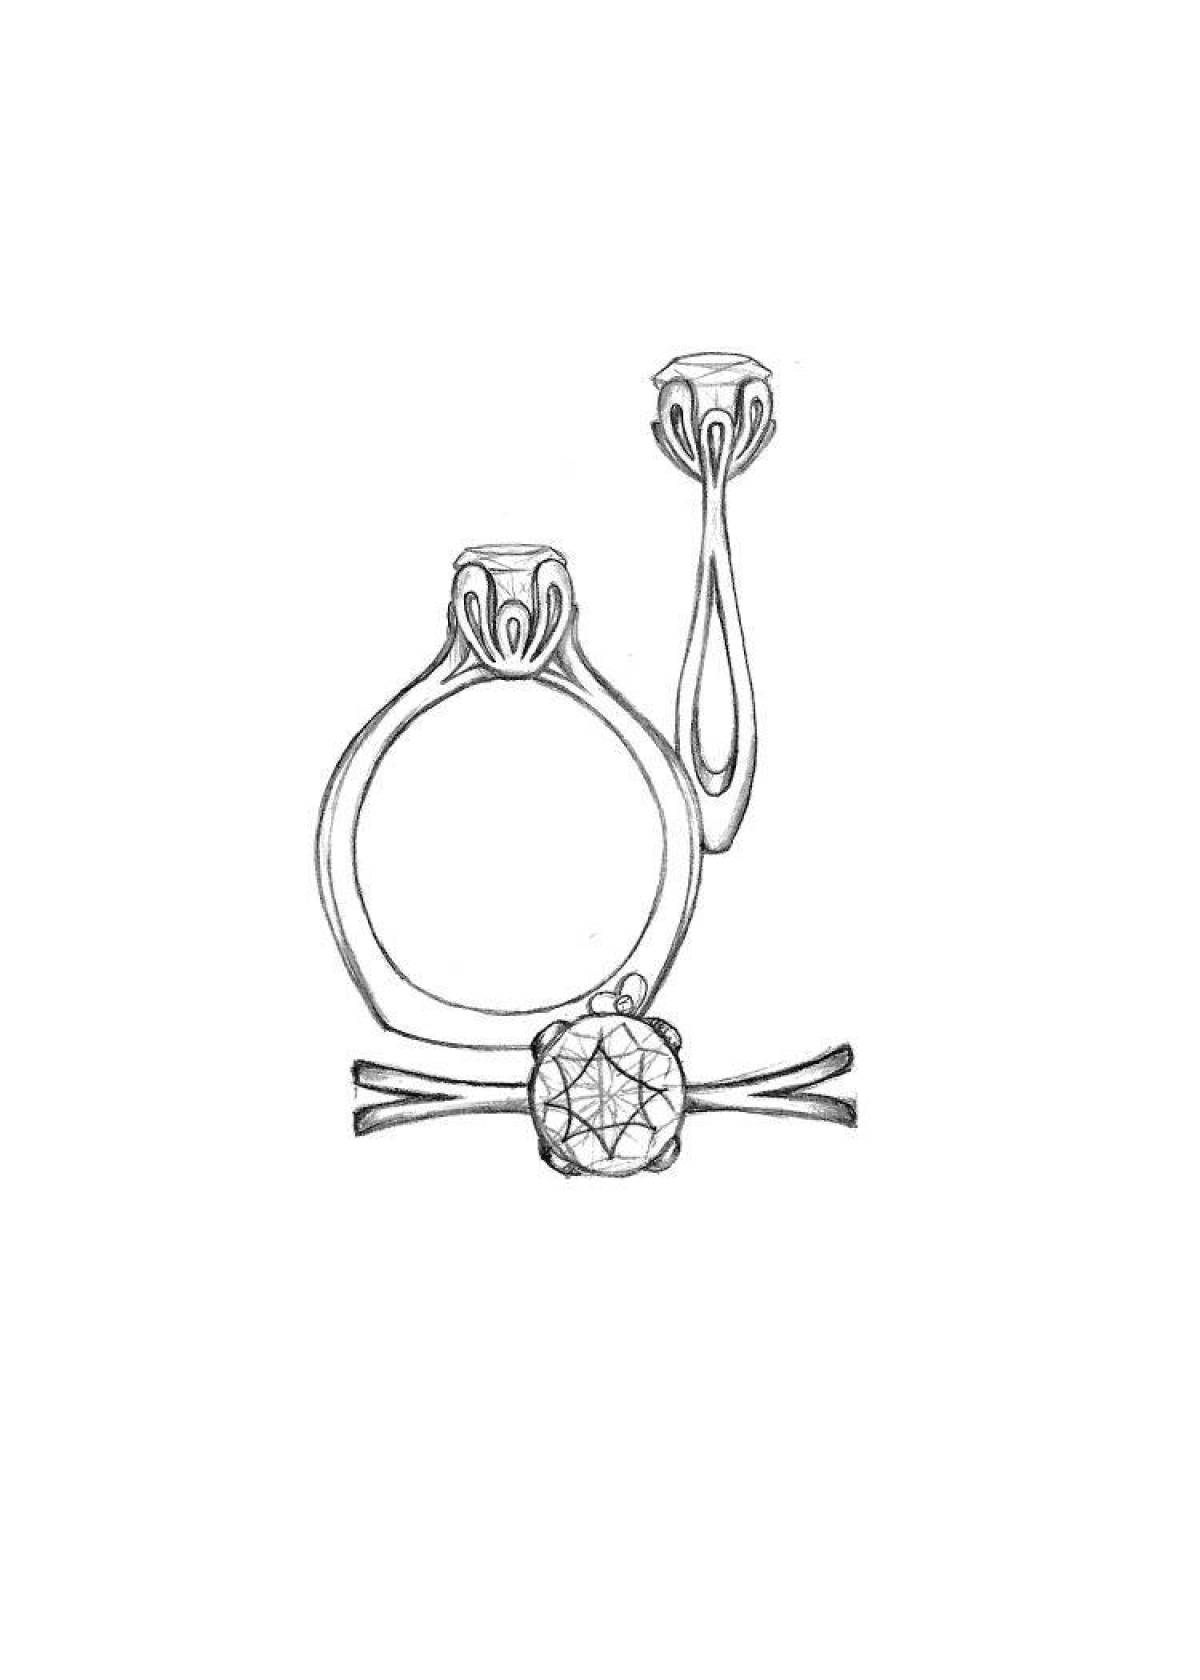 Jeweler Ornate Coloring Page